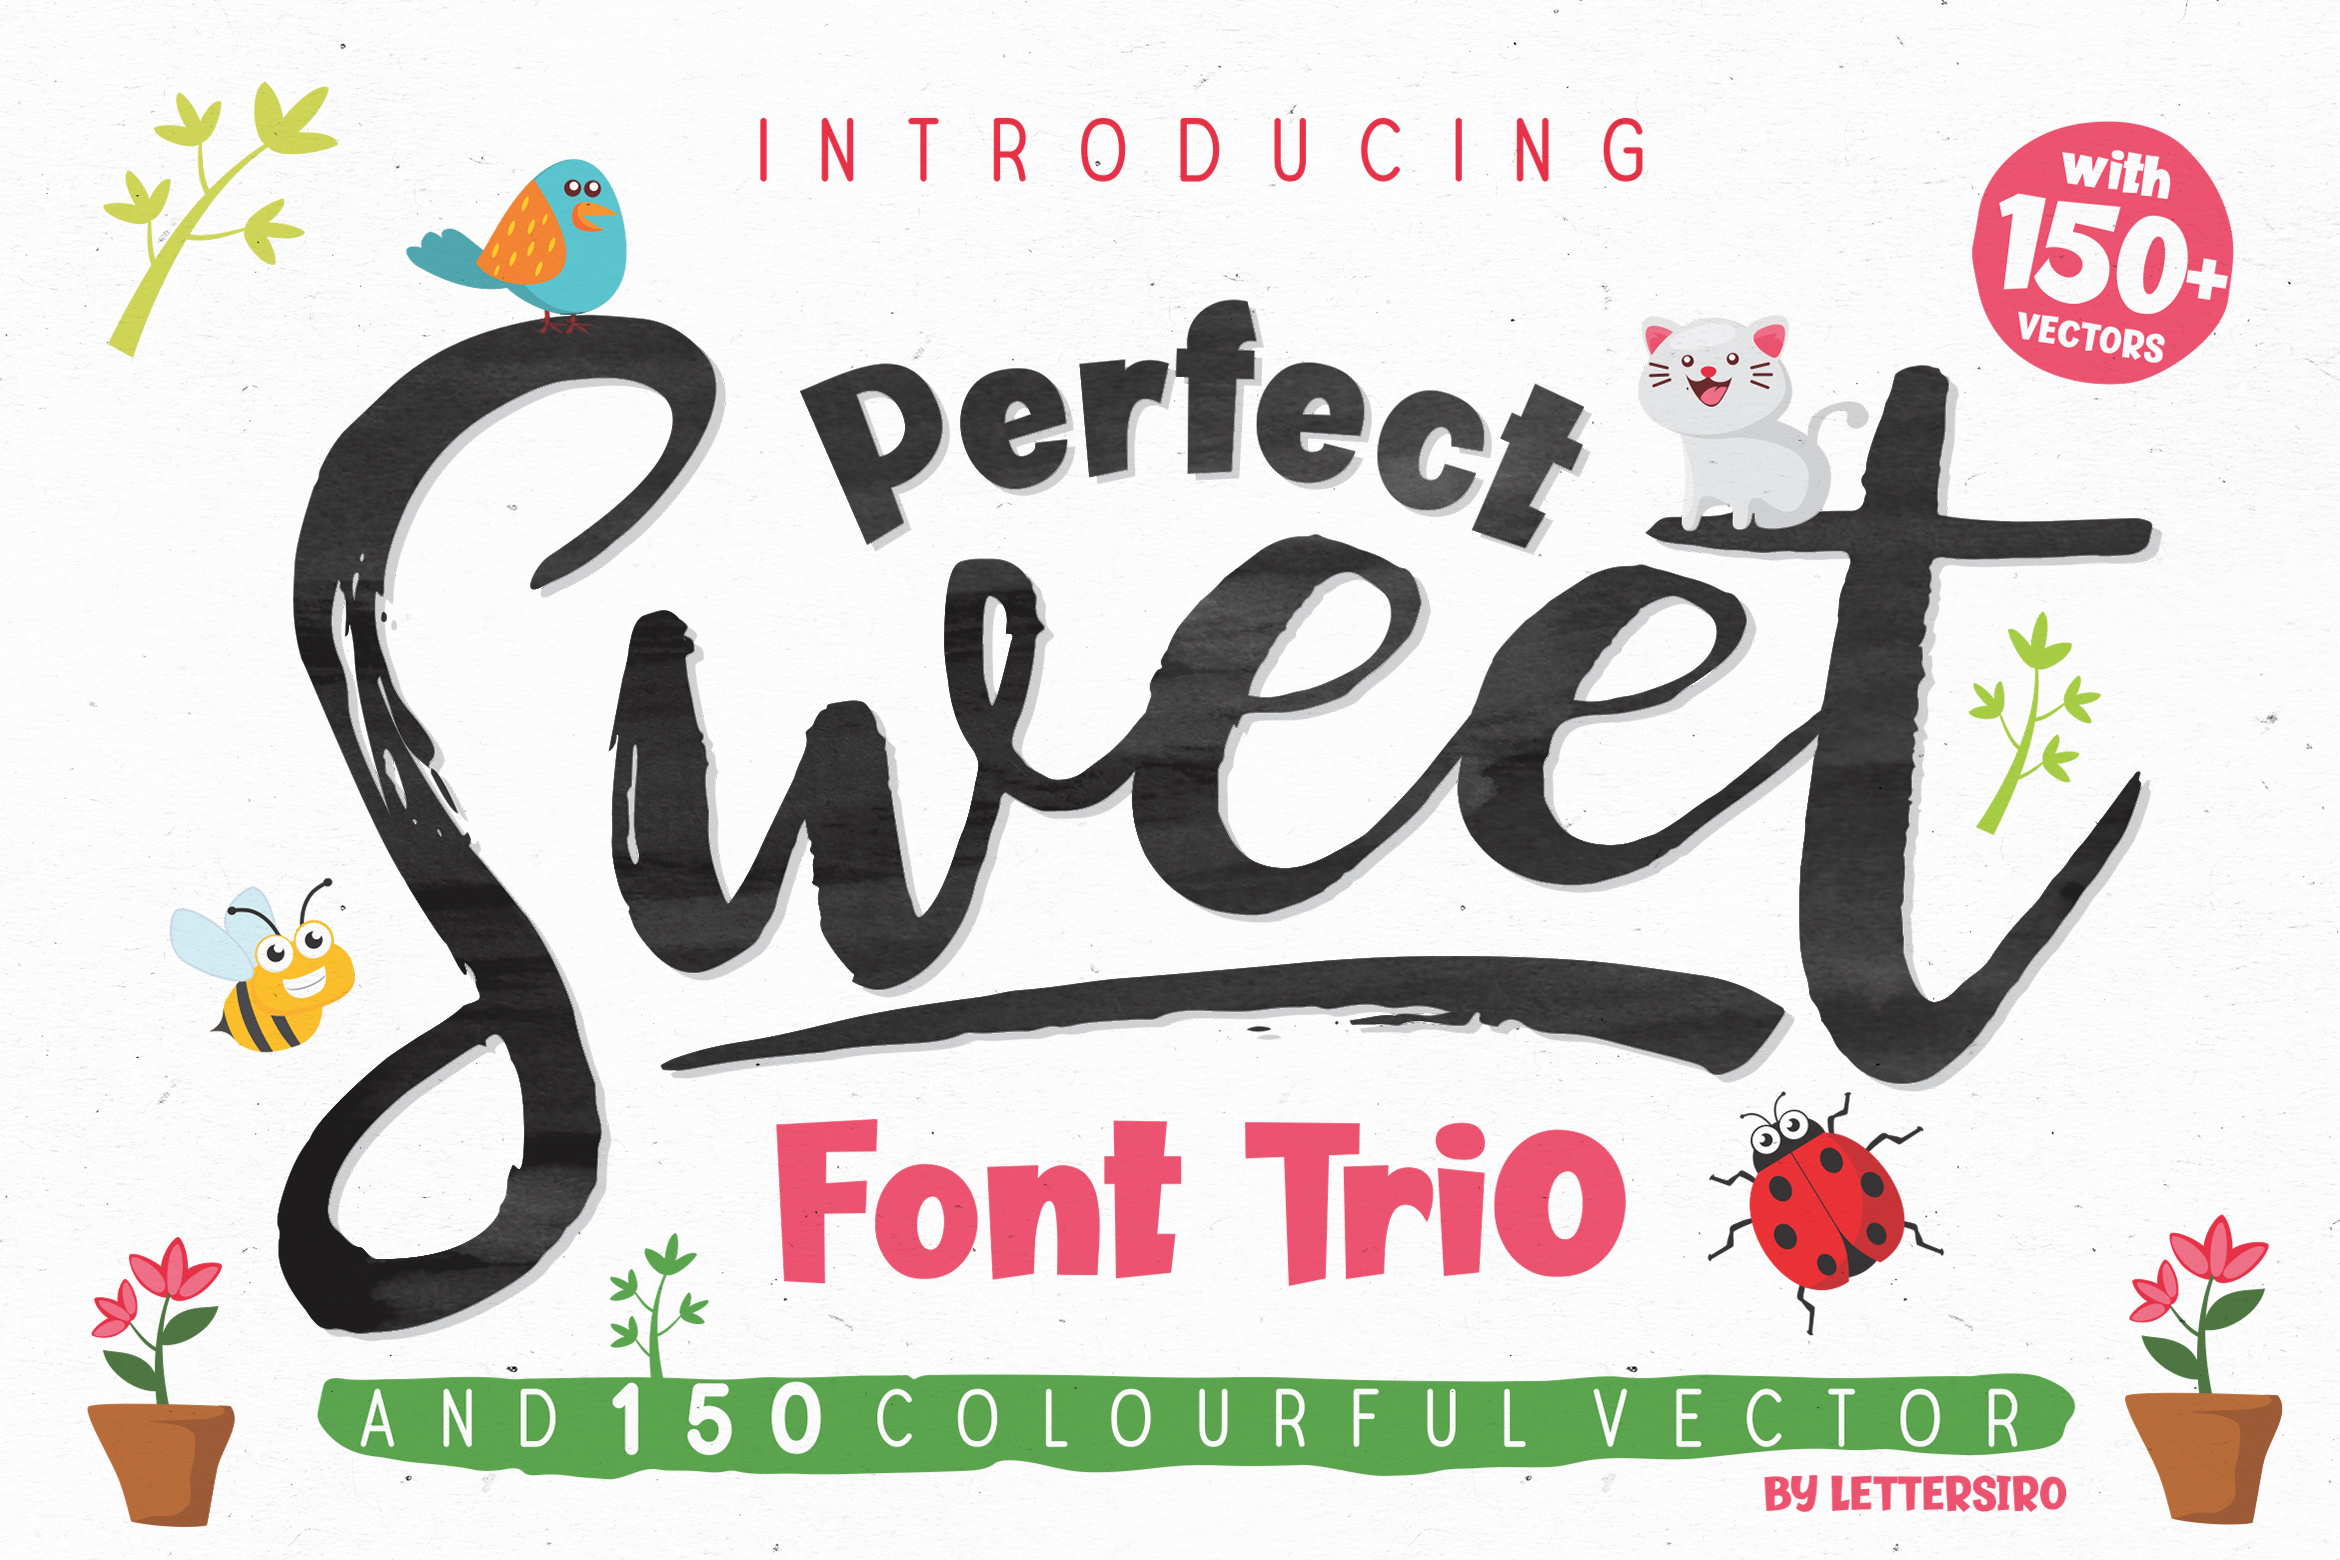 Lettersiro Co. | Perfect Sweet Trio (3 fonts) ~ $16